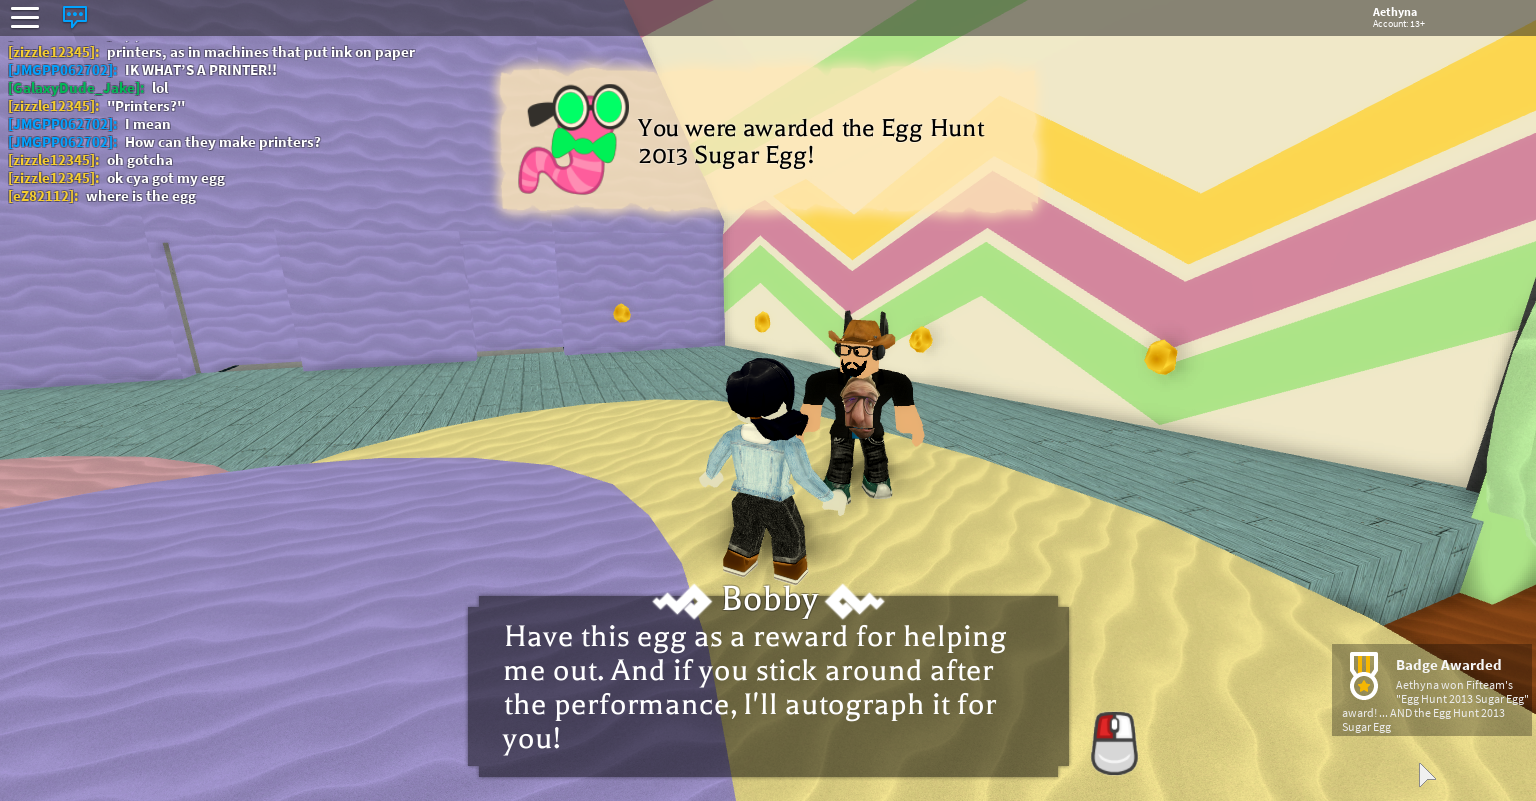 Aveyn S Blog Roblox Egg Hunt 2018 How To Find The Egg Hunt 2013 Sugar Egg In The Festival Of Eggs - how to make a hunt game on roblox